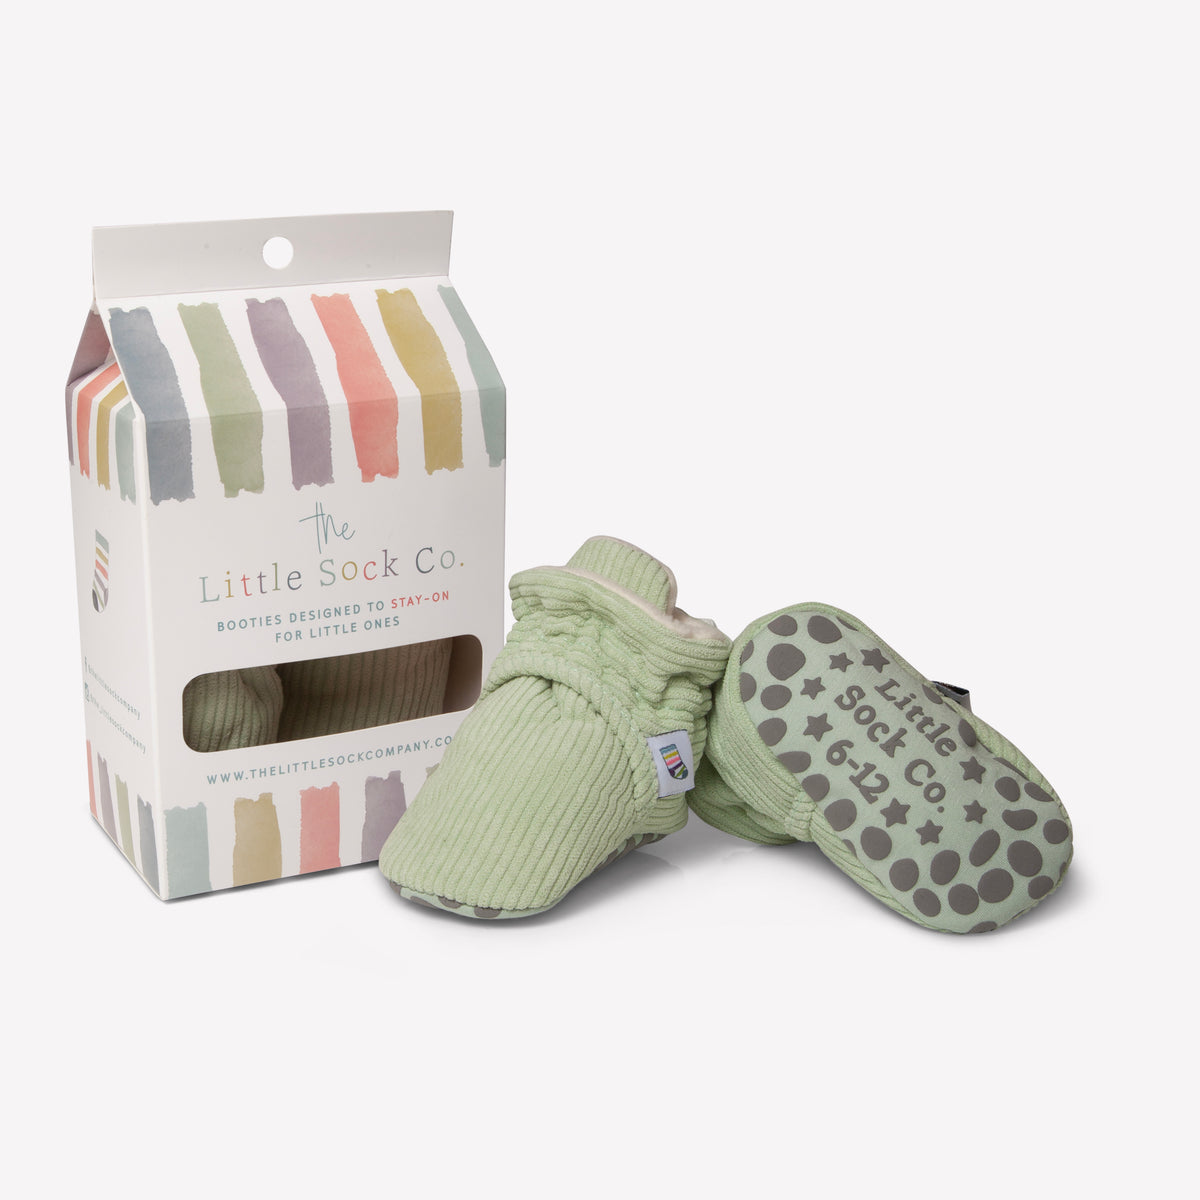 Stay-on, Non-Slip Booties - Perfect pram Slipper and Baby Carrier boot - Pistachio Corduroy